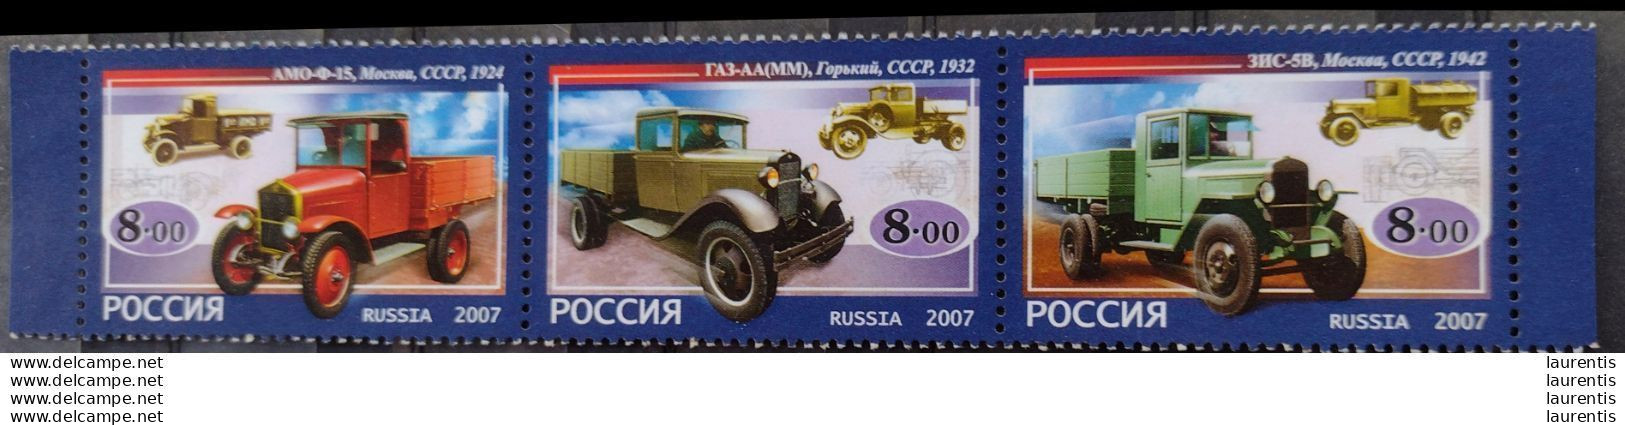 D7467. Trucks - Camions - Russia Yv 7016-18 MNH - 0,95 (3) - Camions